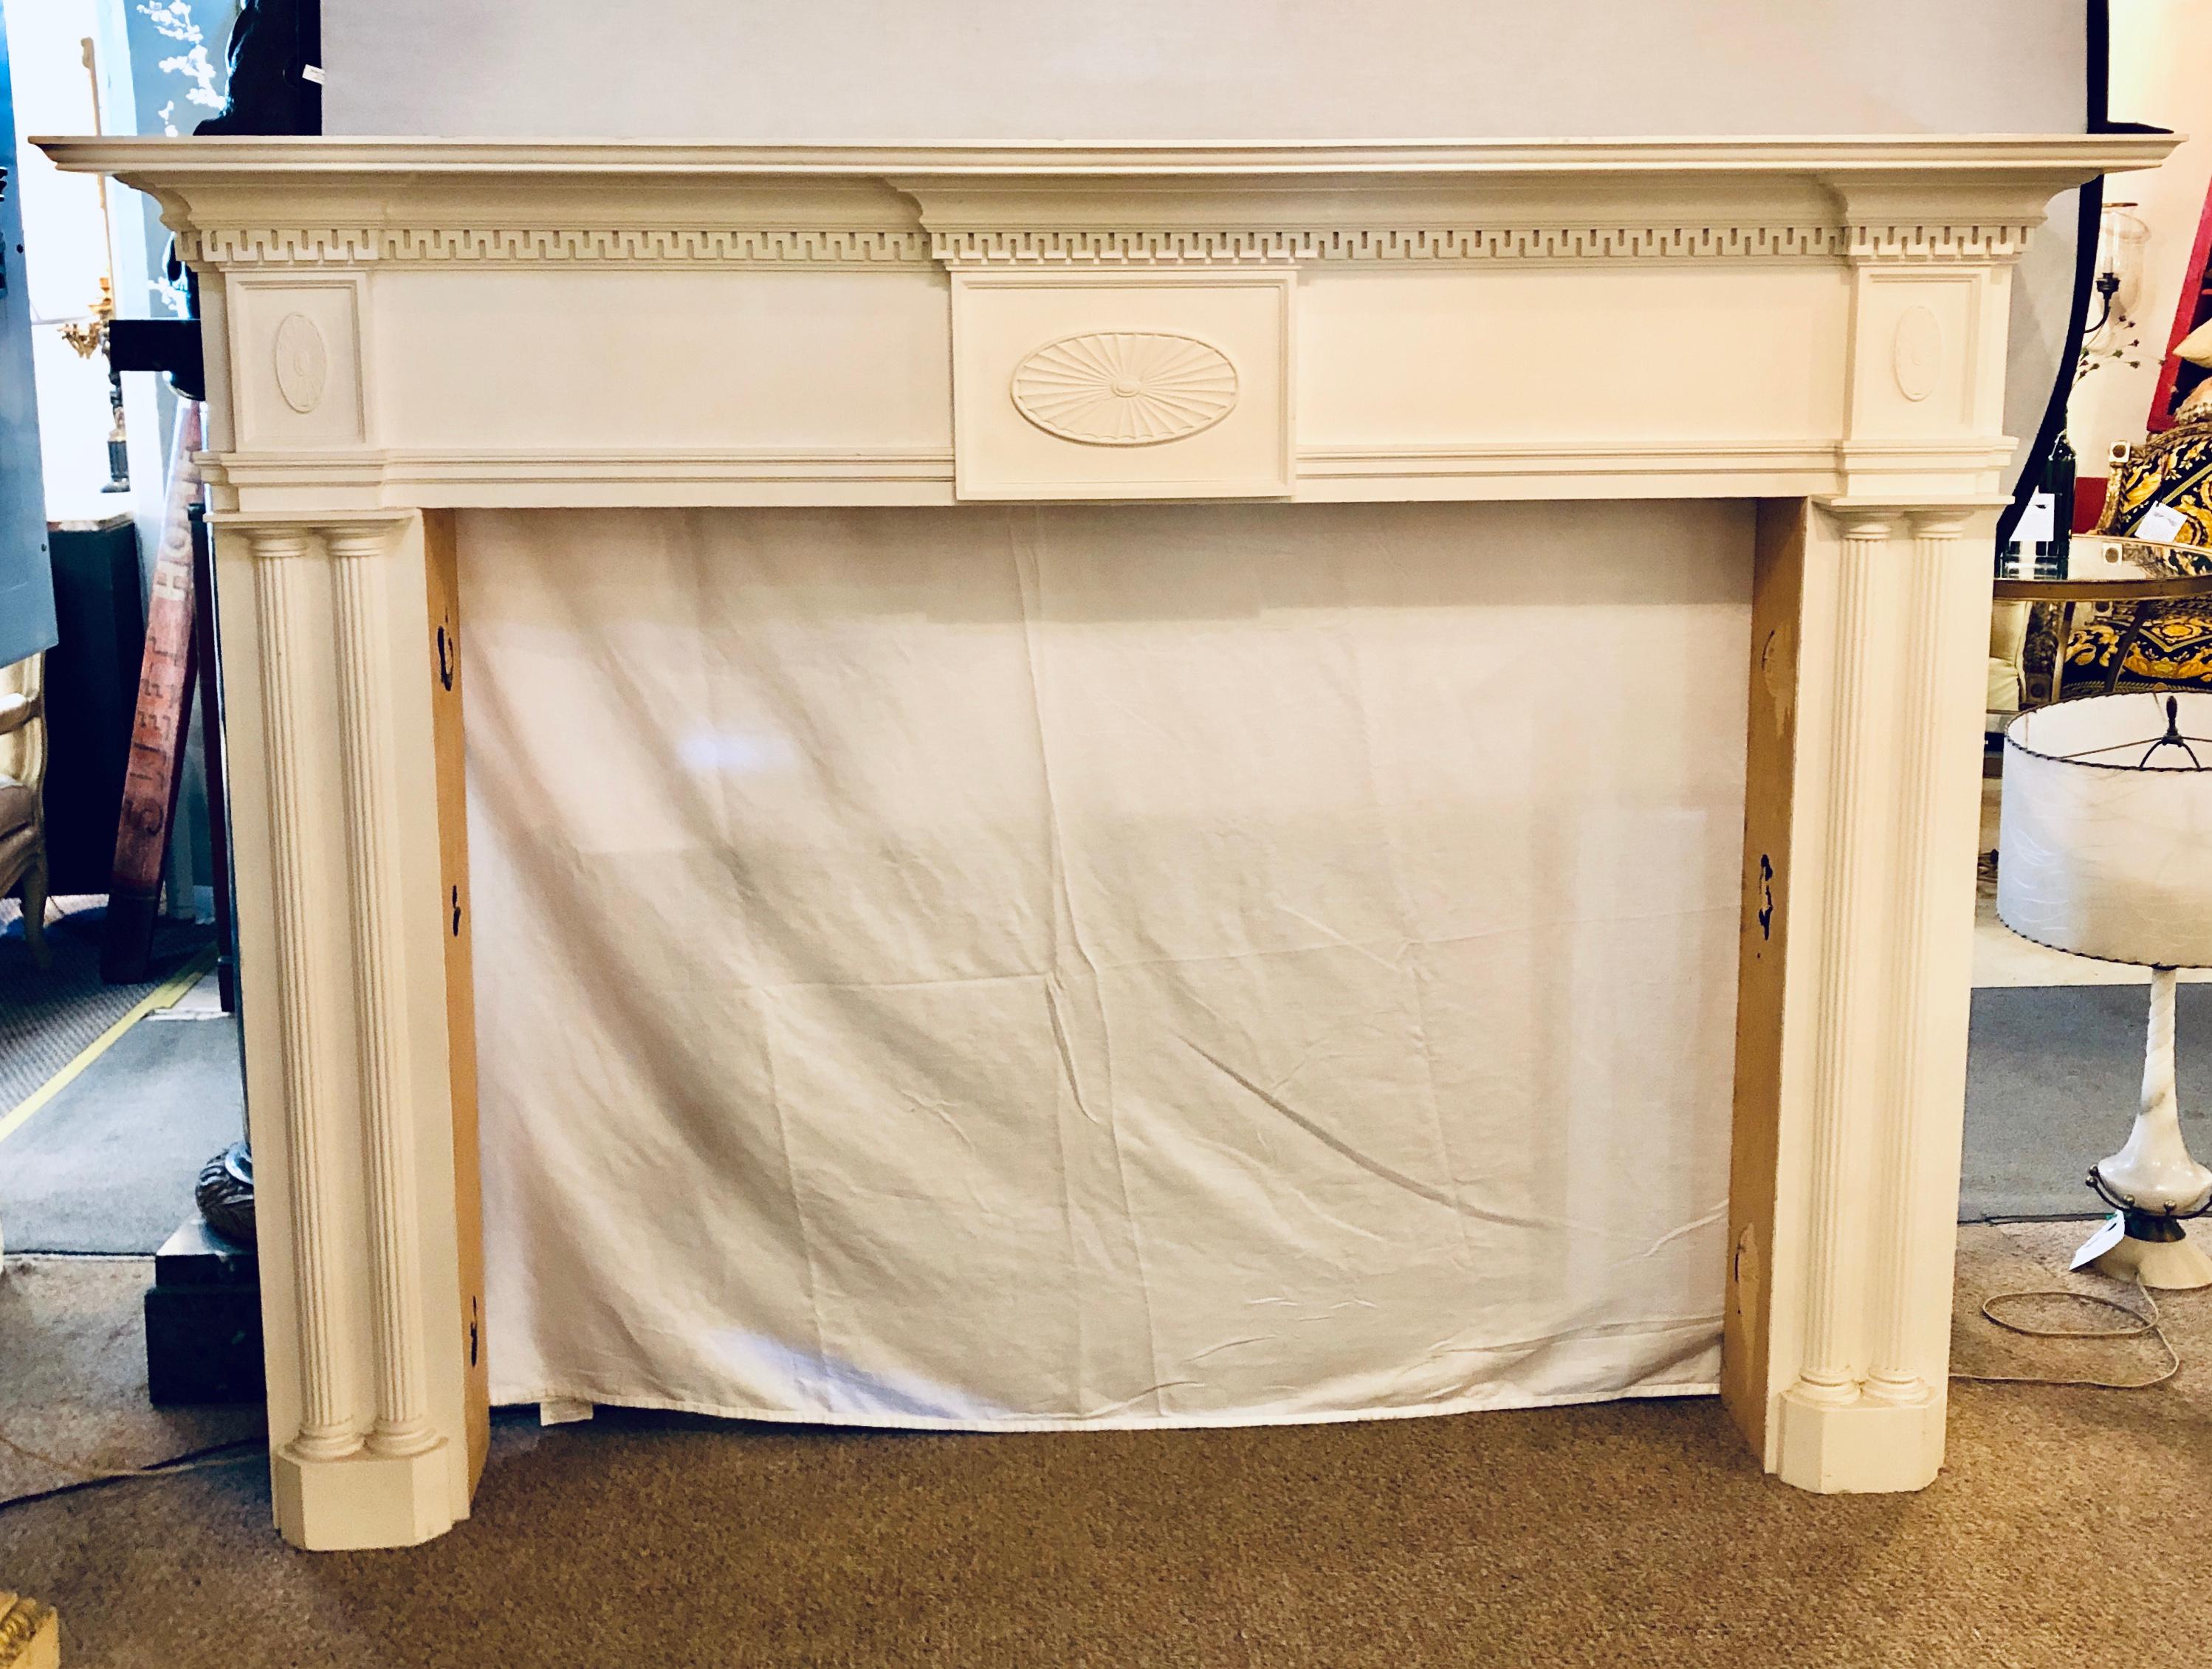 A monumental custom quality solid wood hand carved neoclassical fire place surrounds. This is a simply stunning piece in an off linen white painted finish with hand carvings throughout and urn form decorated. The whole with dental carvings under the